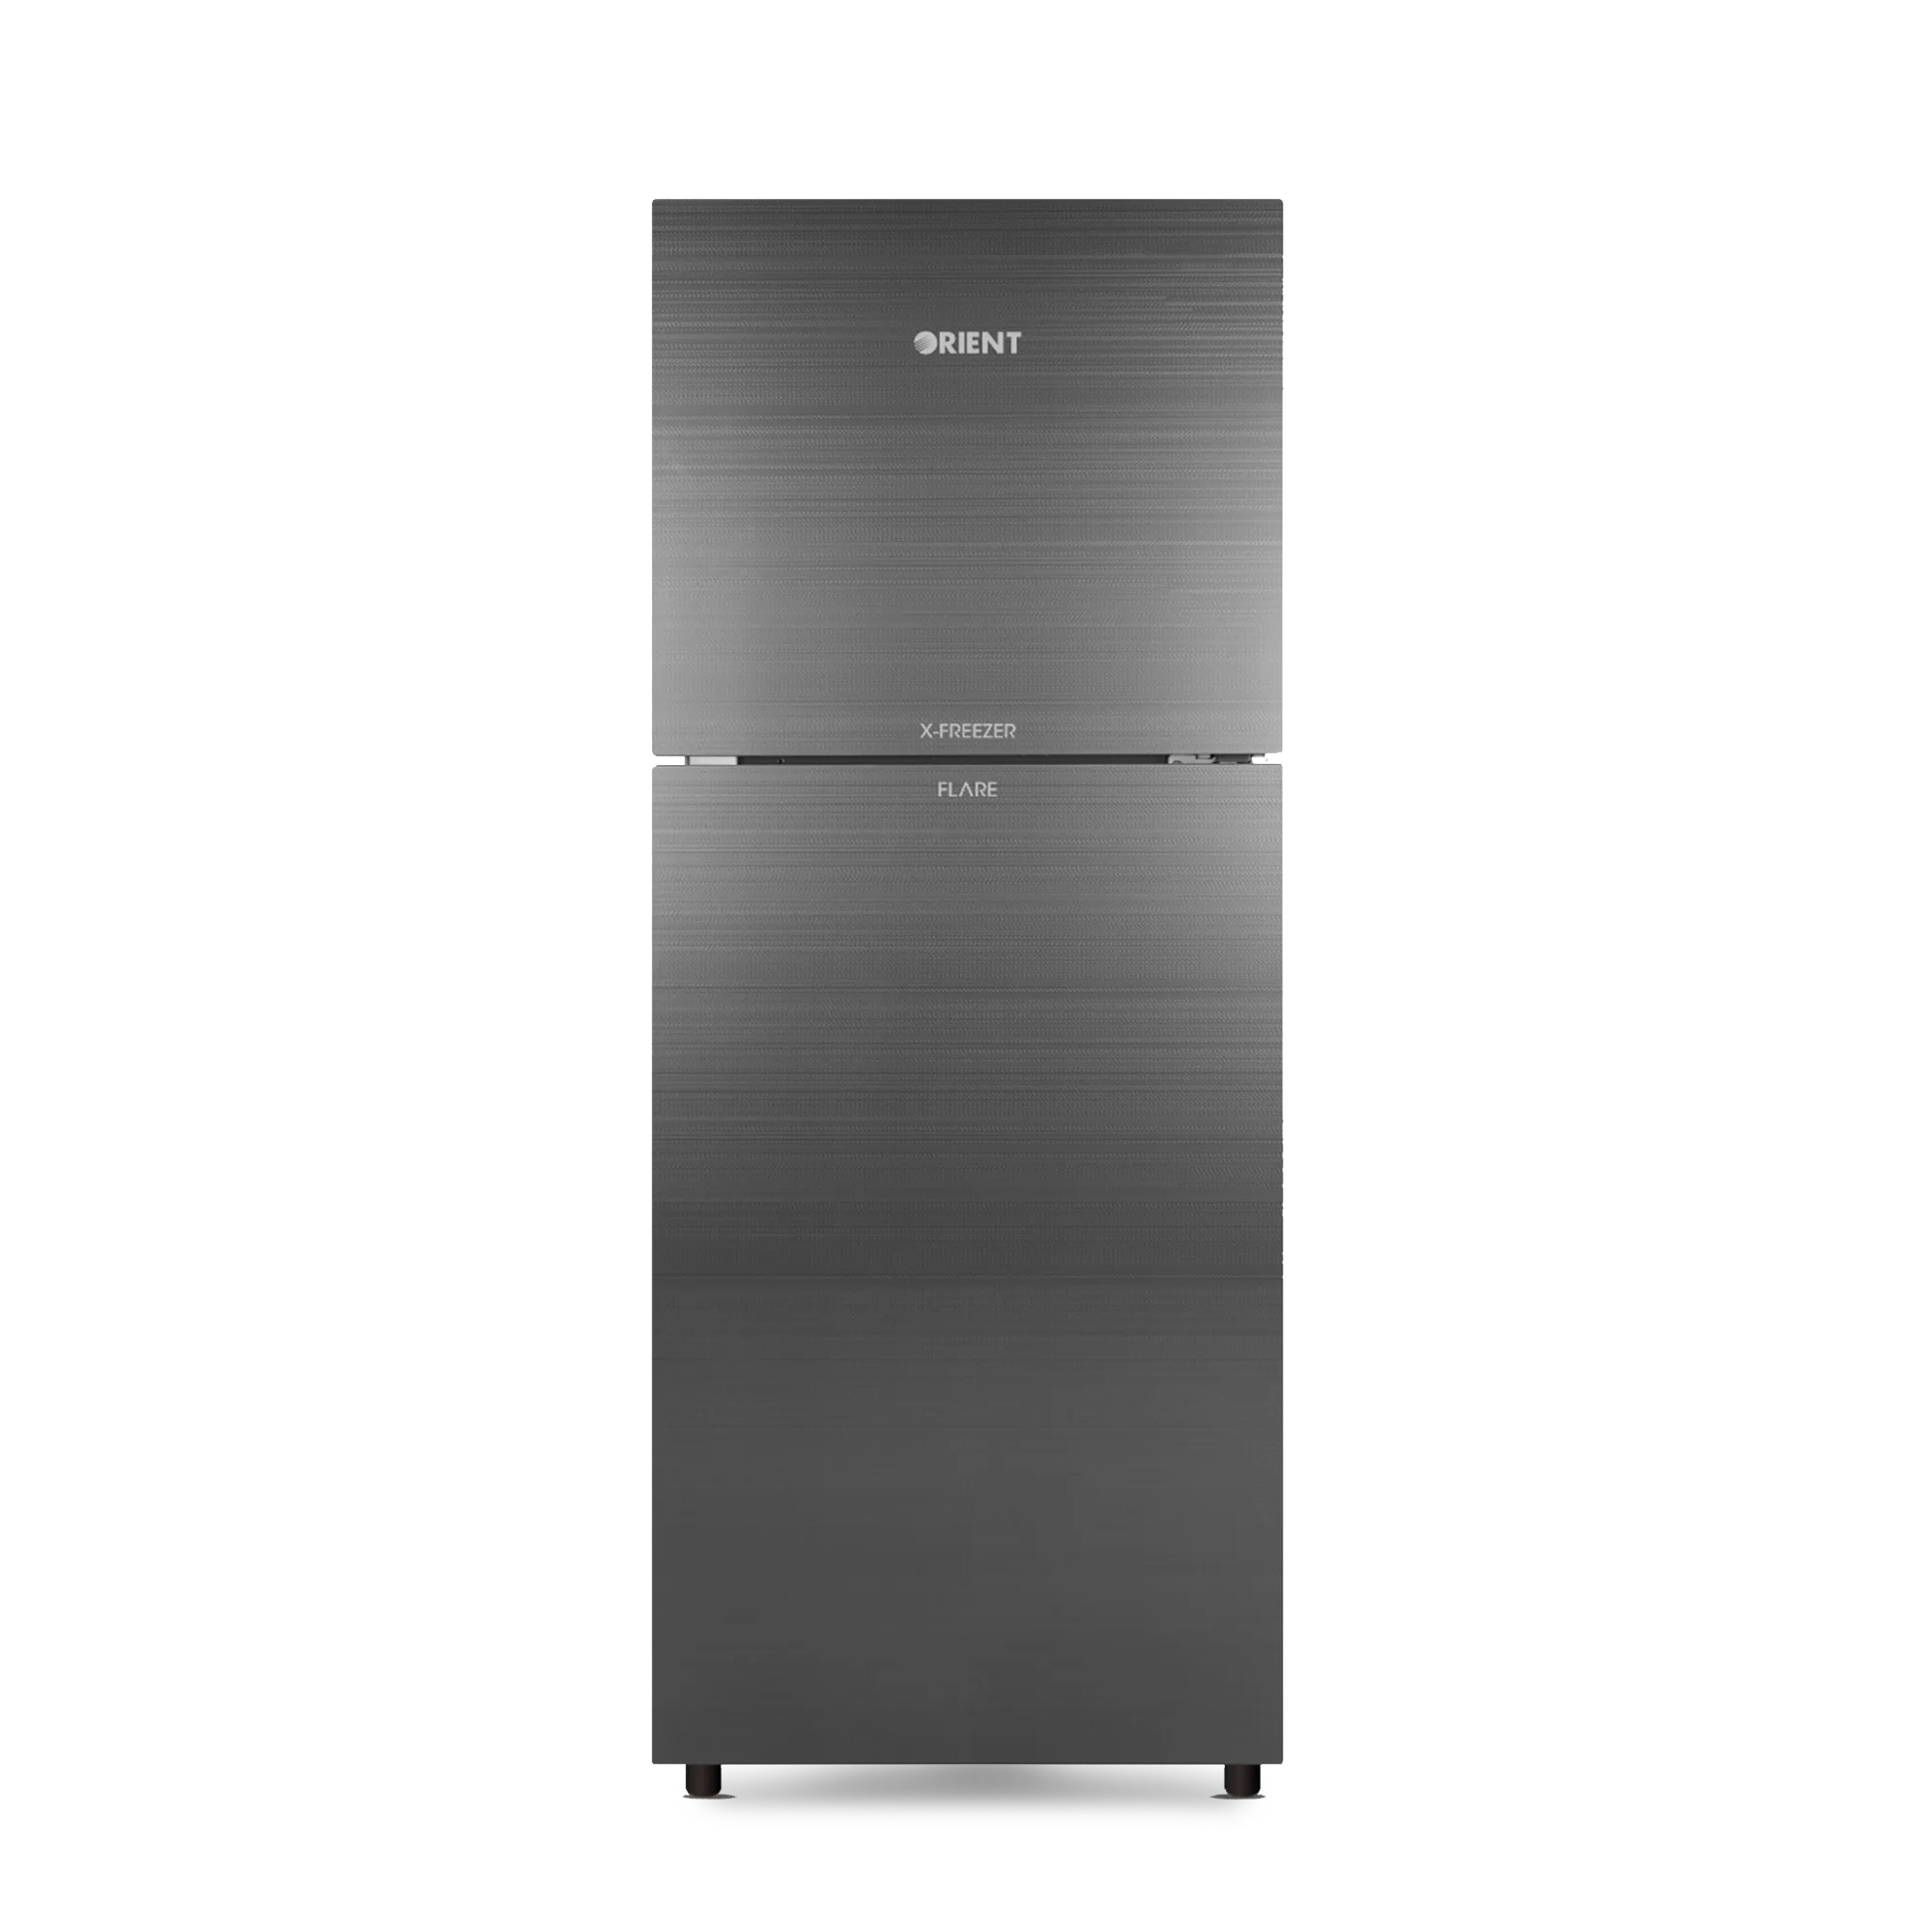 Orient FLARE 470 Glass Door Refrigerator 15 CFT With Official Warranty